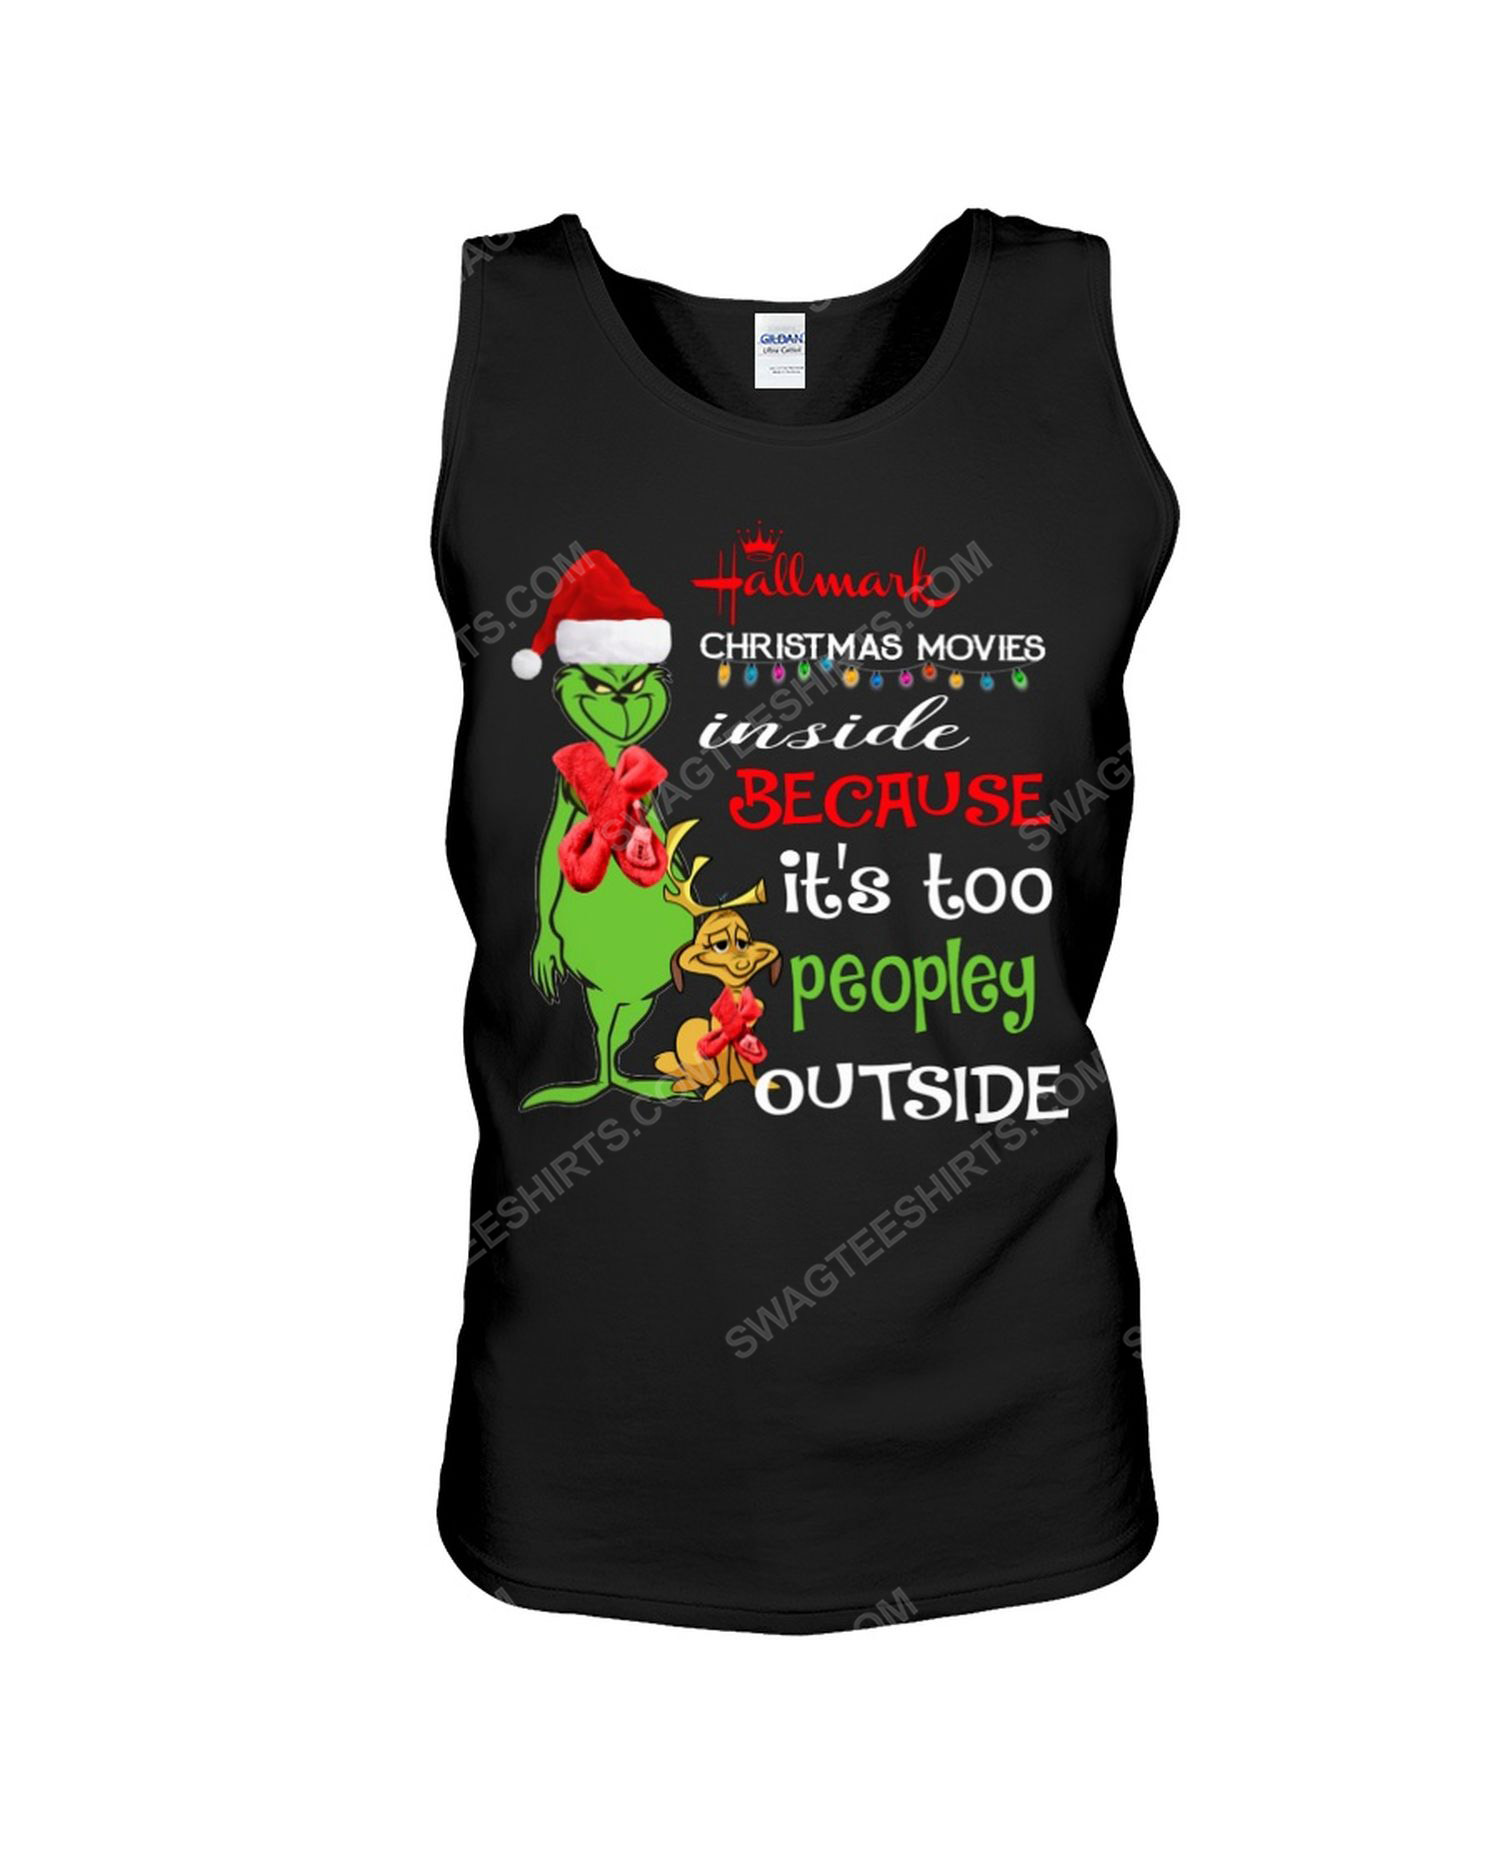 The grinch hallmark christmas movies inside because its too peopley outside christmas grinch tank top